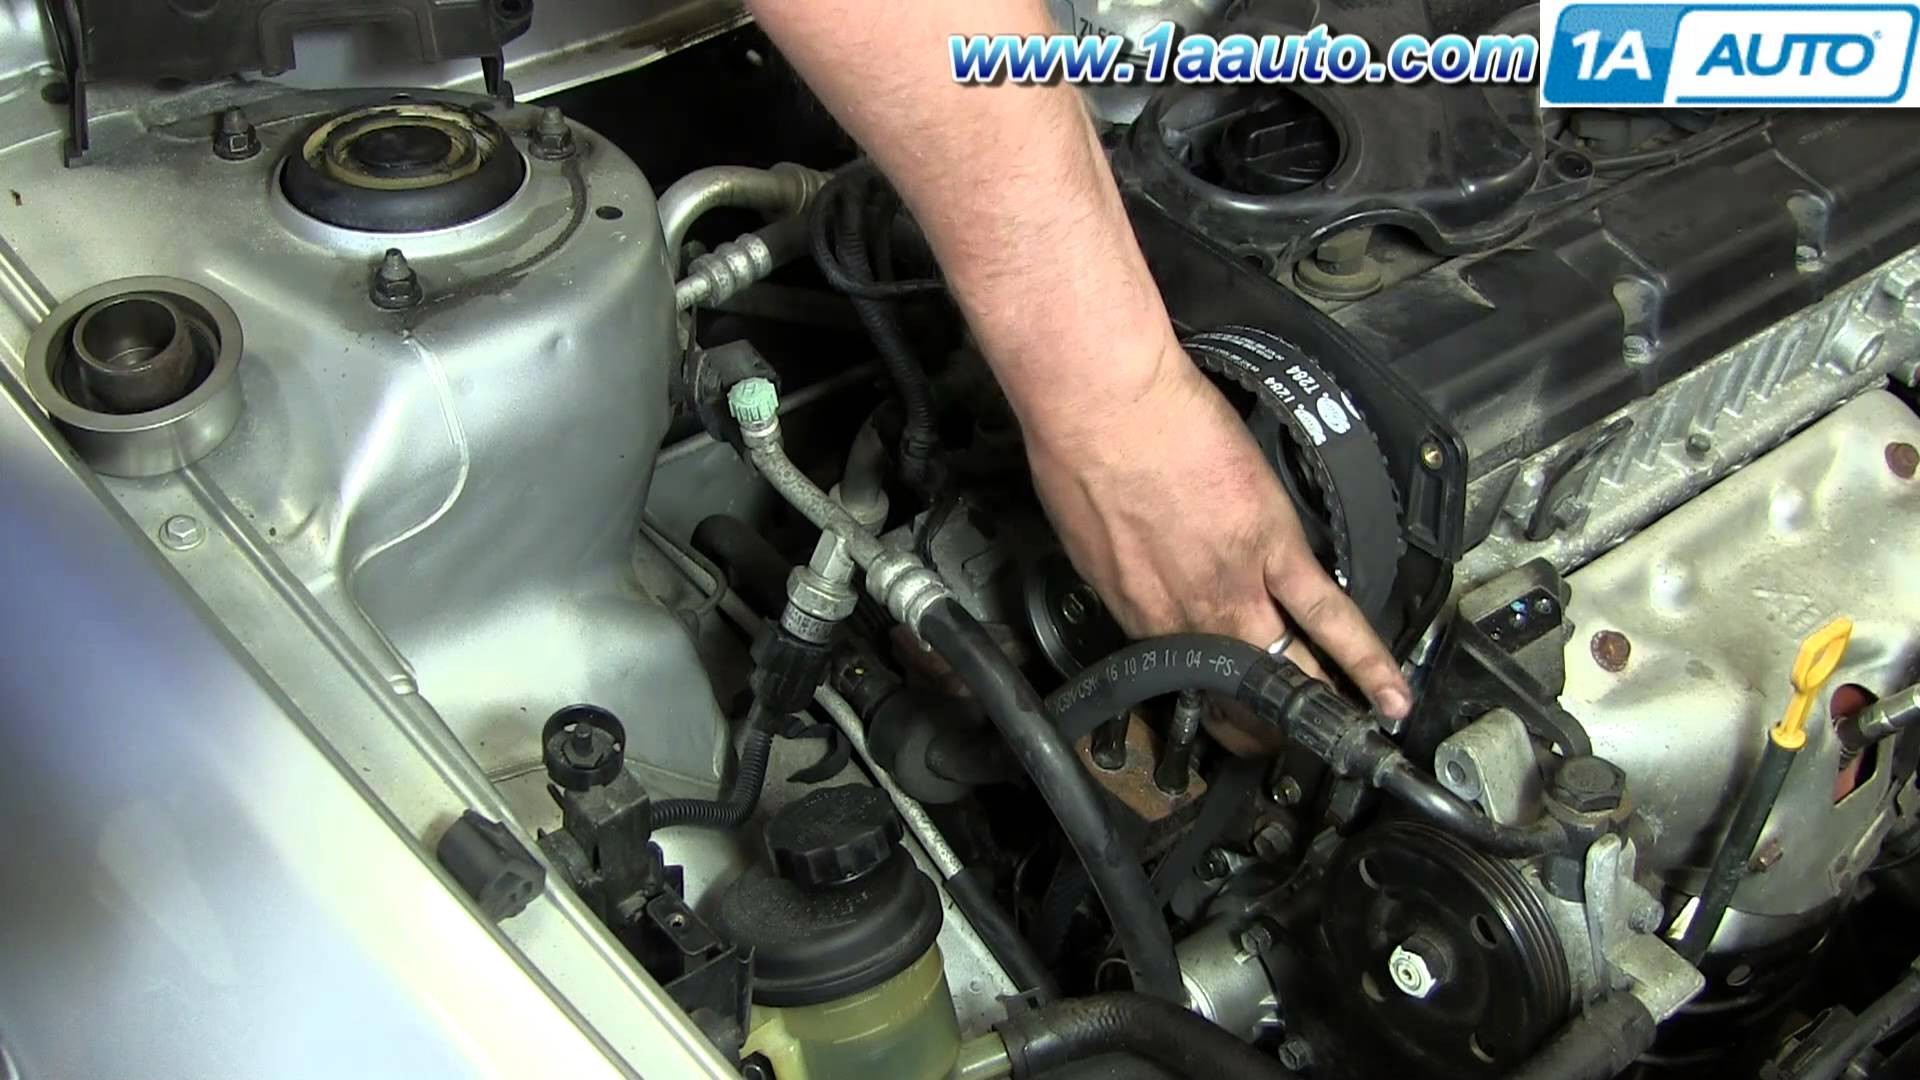 2004 Hyundai Accent Engine Diagram Part 2 How to Install Replace Timing Belt and Water Pump Hyundai